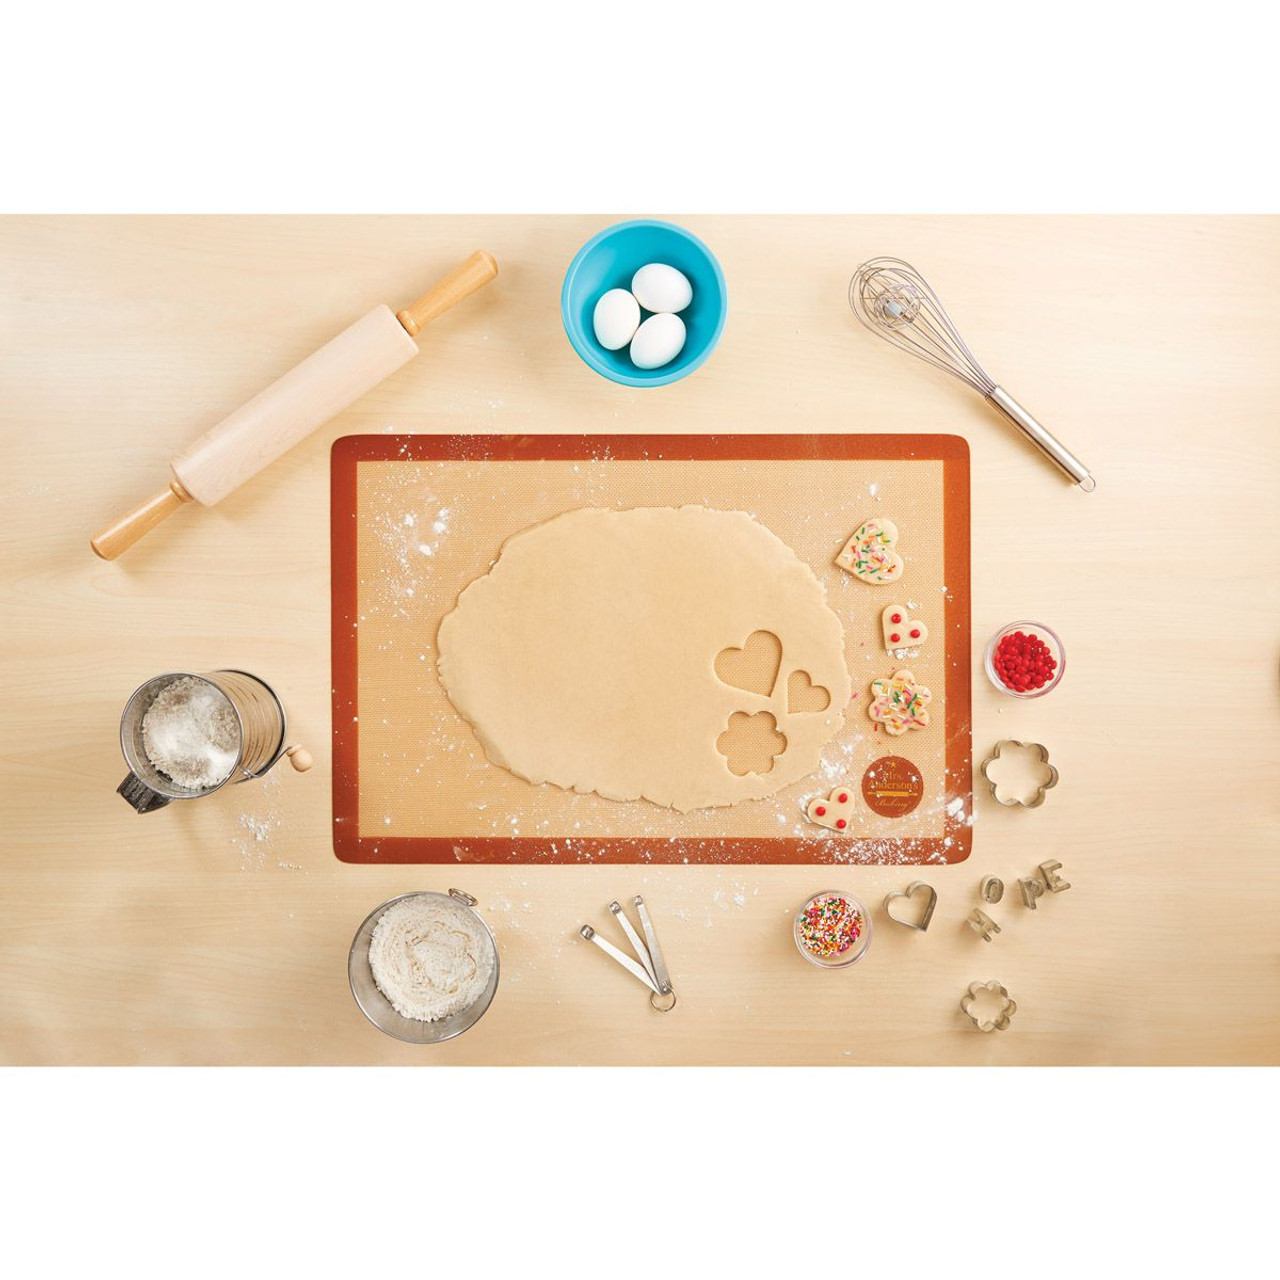 Mrs. Anderson's Baking U.S. Half Size Silicone Baking Mat (HIC 60001)